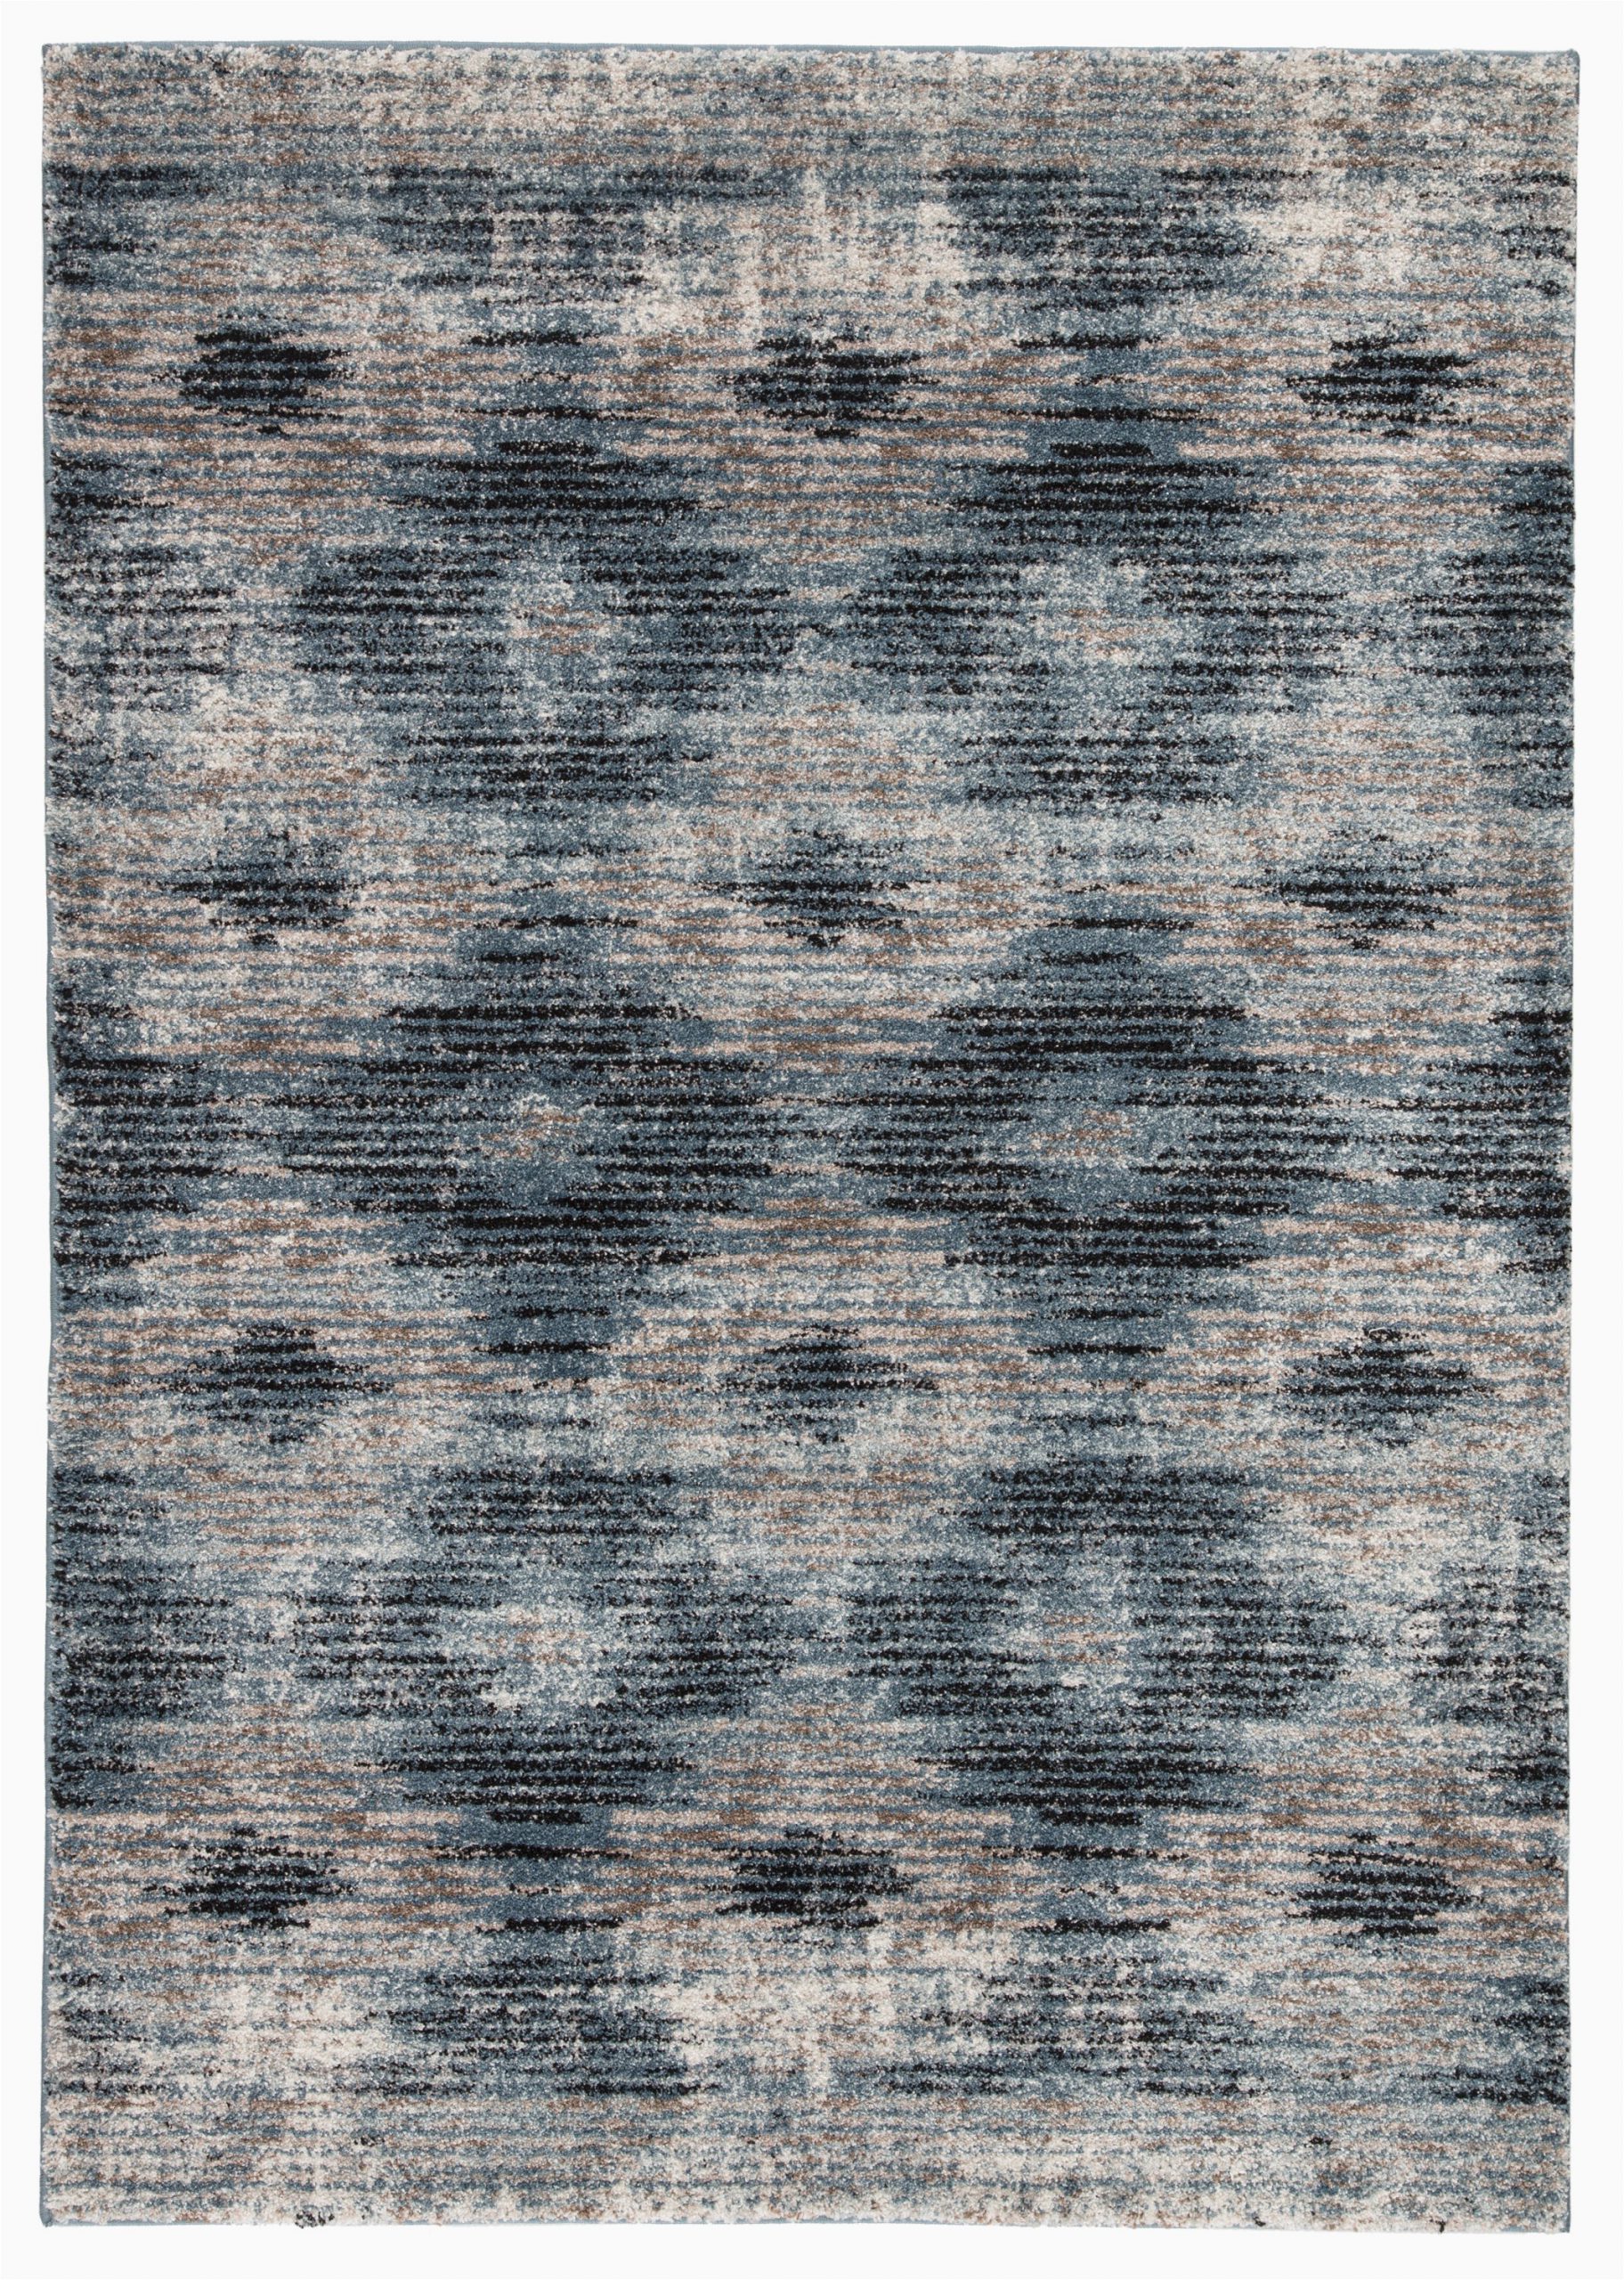 gillenwater geometric bluegray area rug j piid= &experiencetype=1